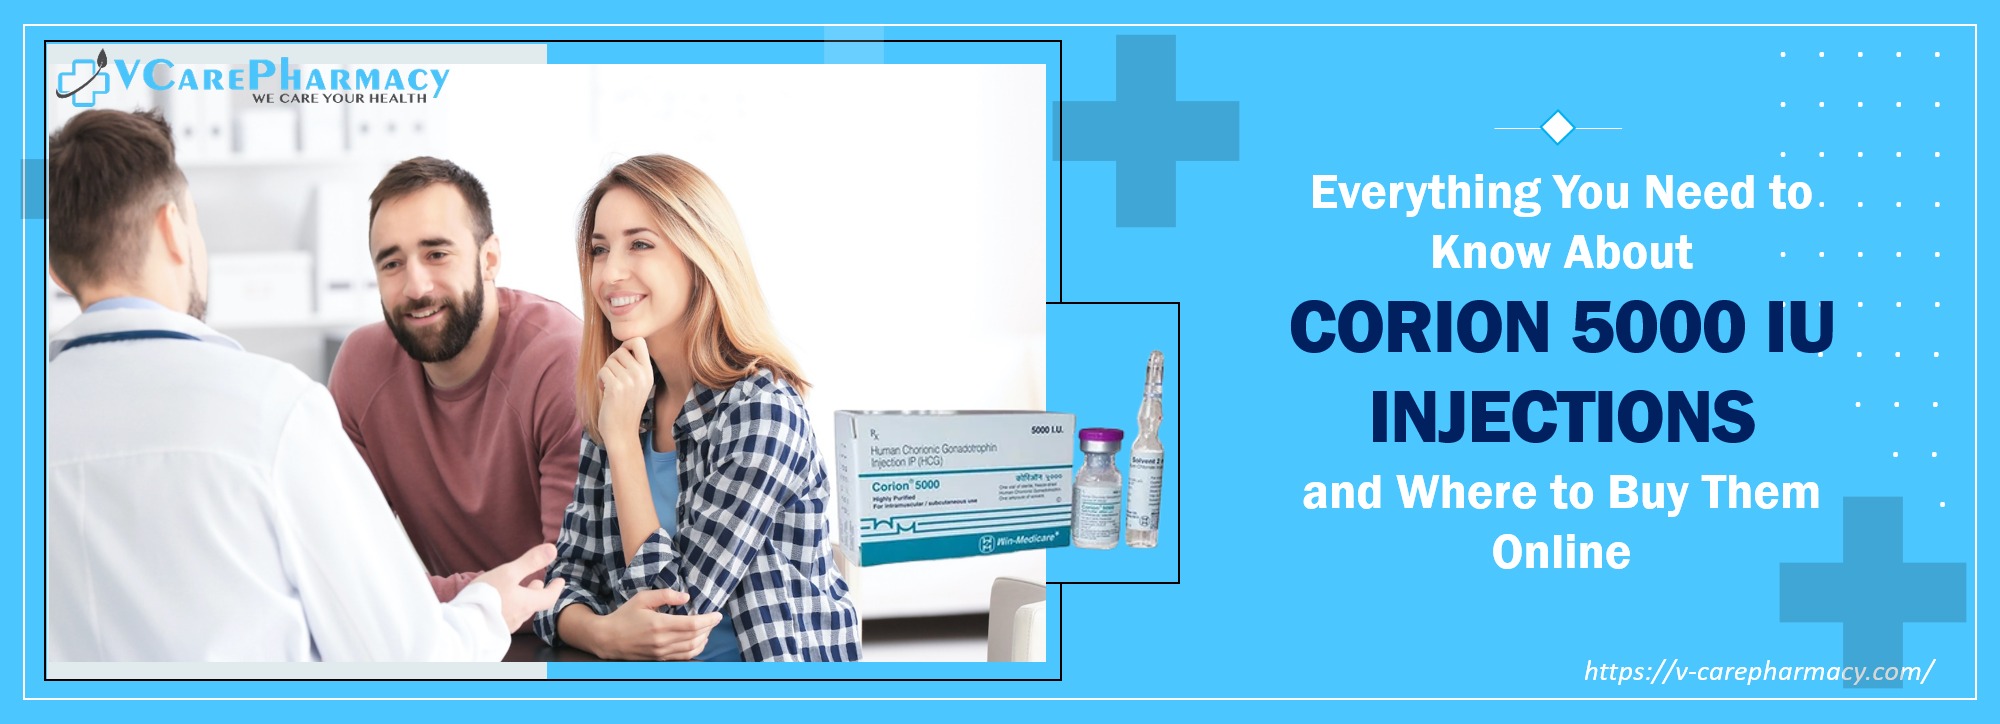 Everything You Need to Know About Corion 5000 IU Injections and Where to Buy Them Online?